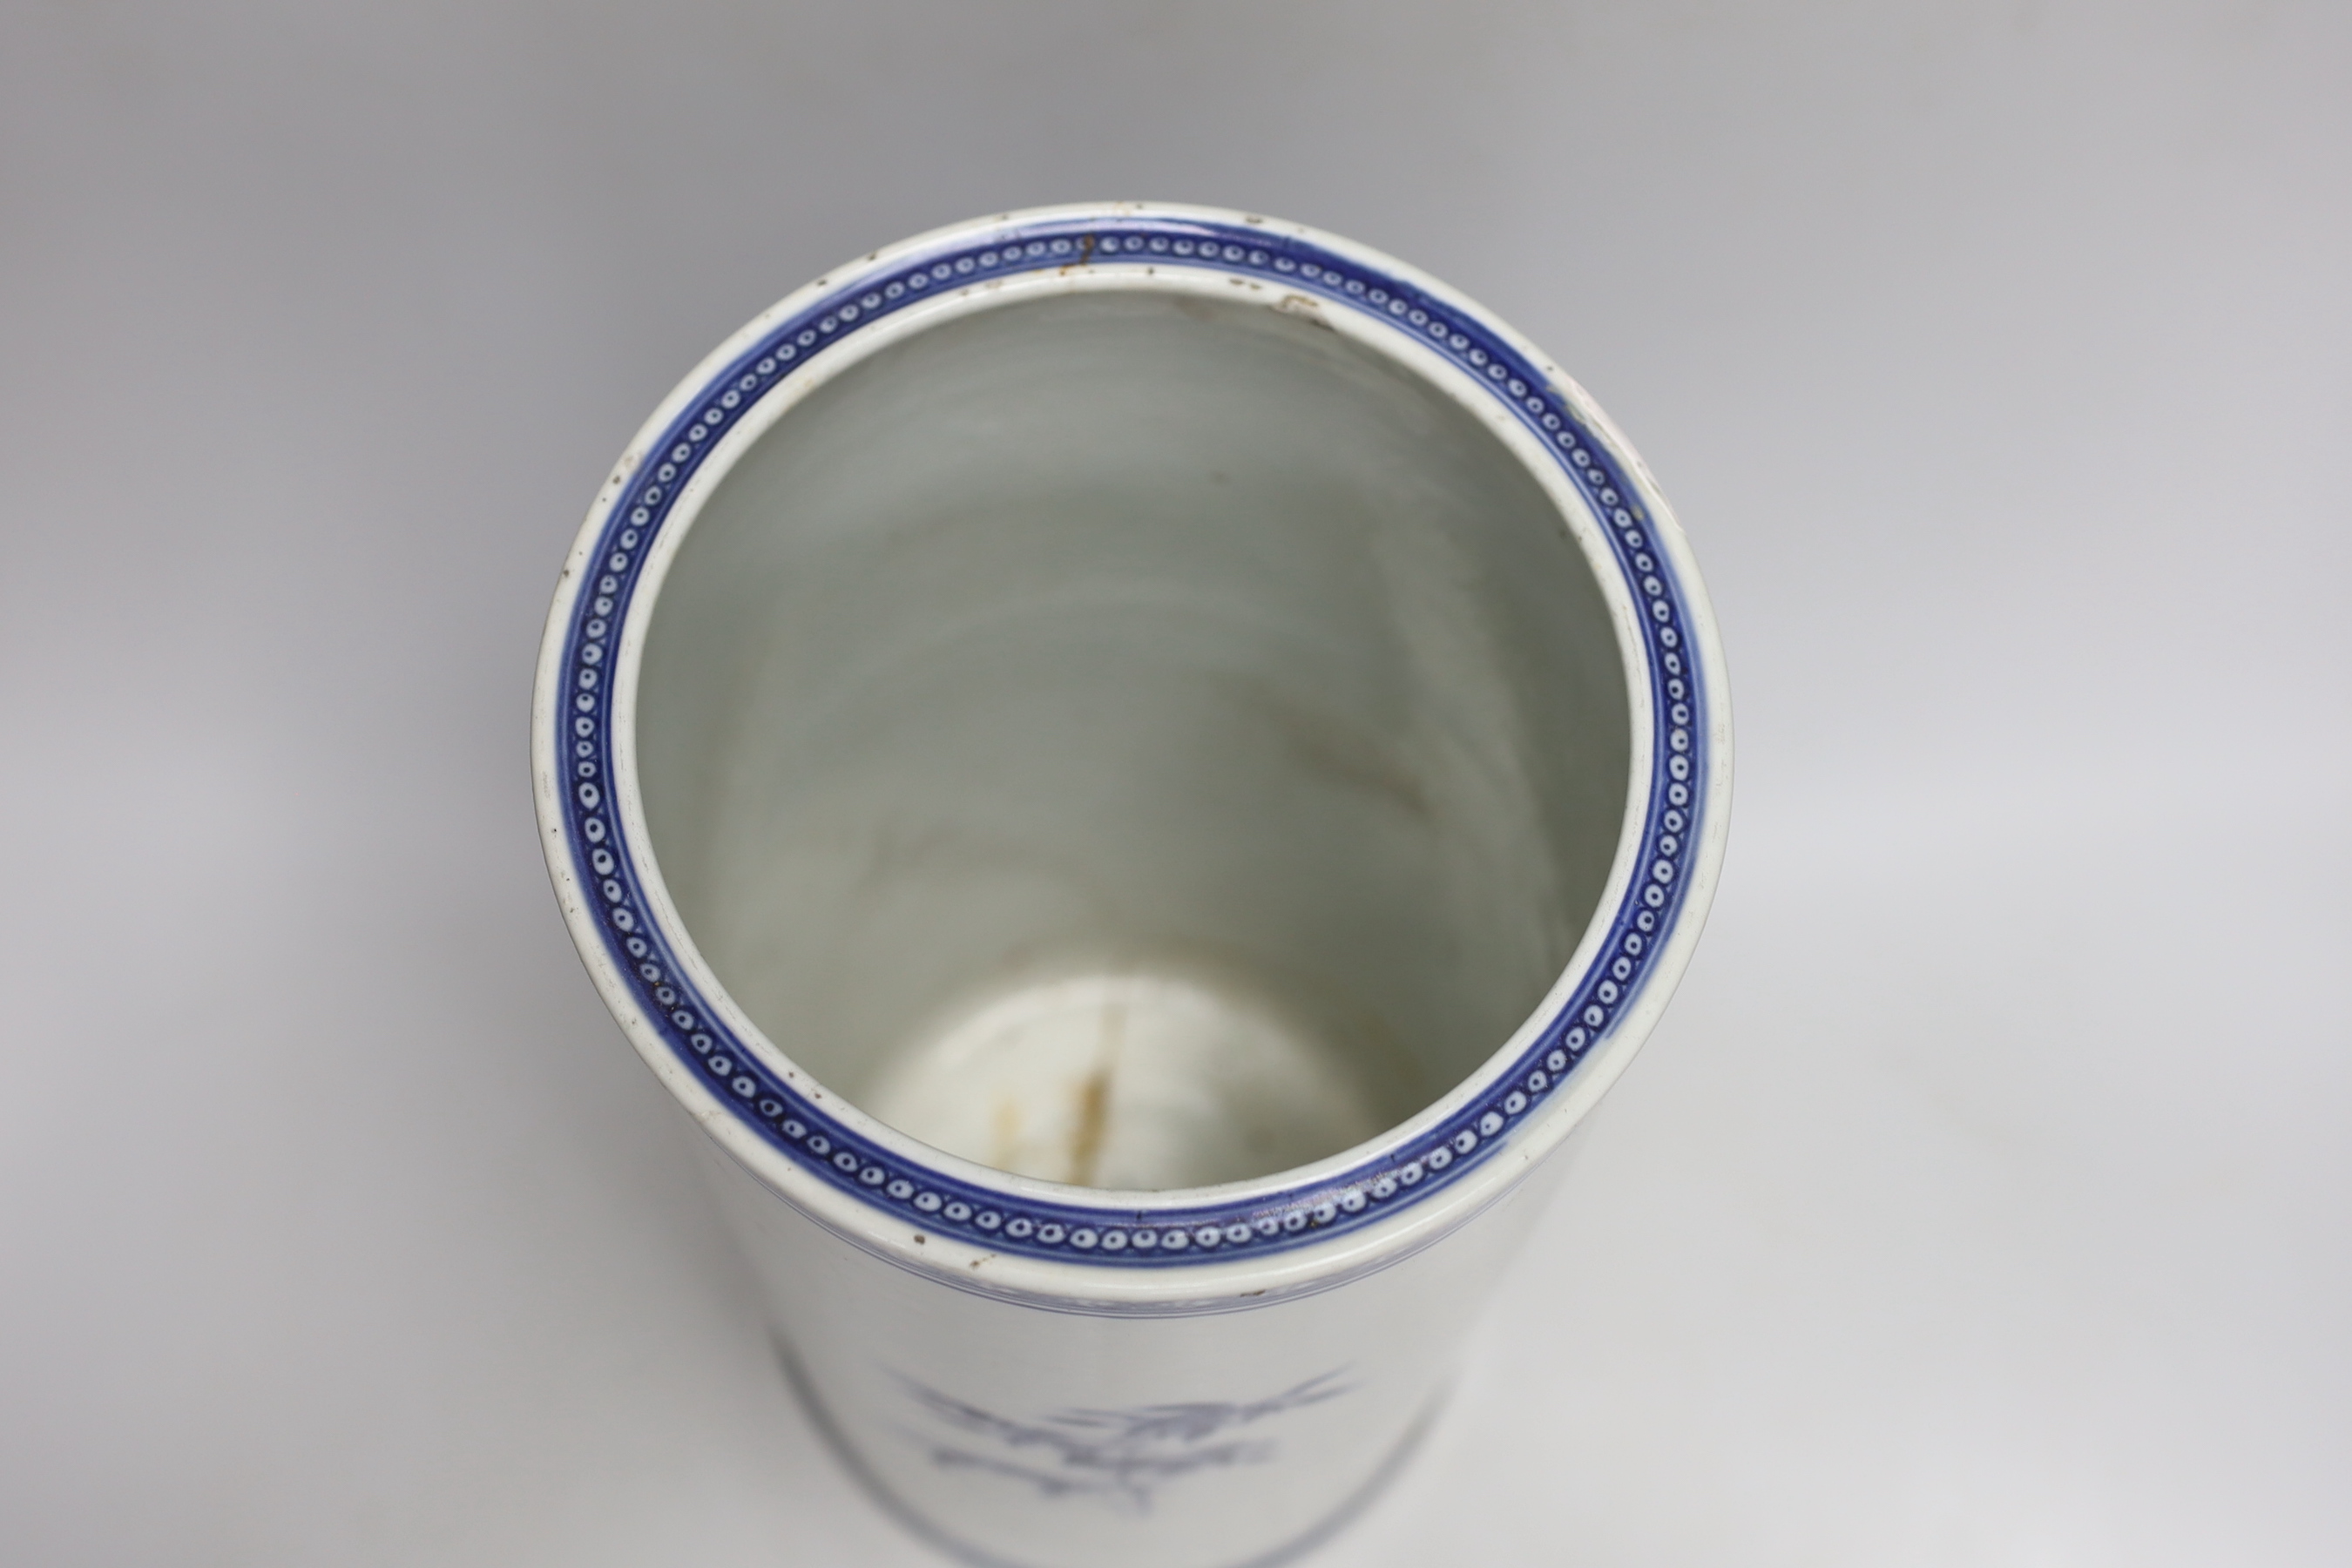 A 19th century Chinese blue and white cylinder vase, 32cm (a.f.)